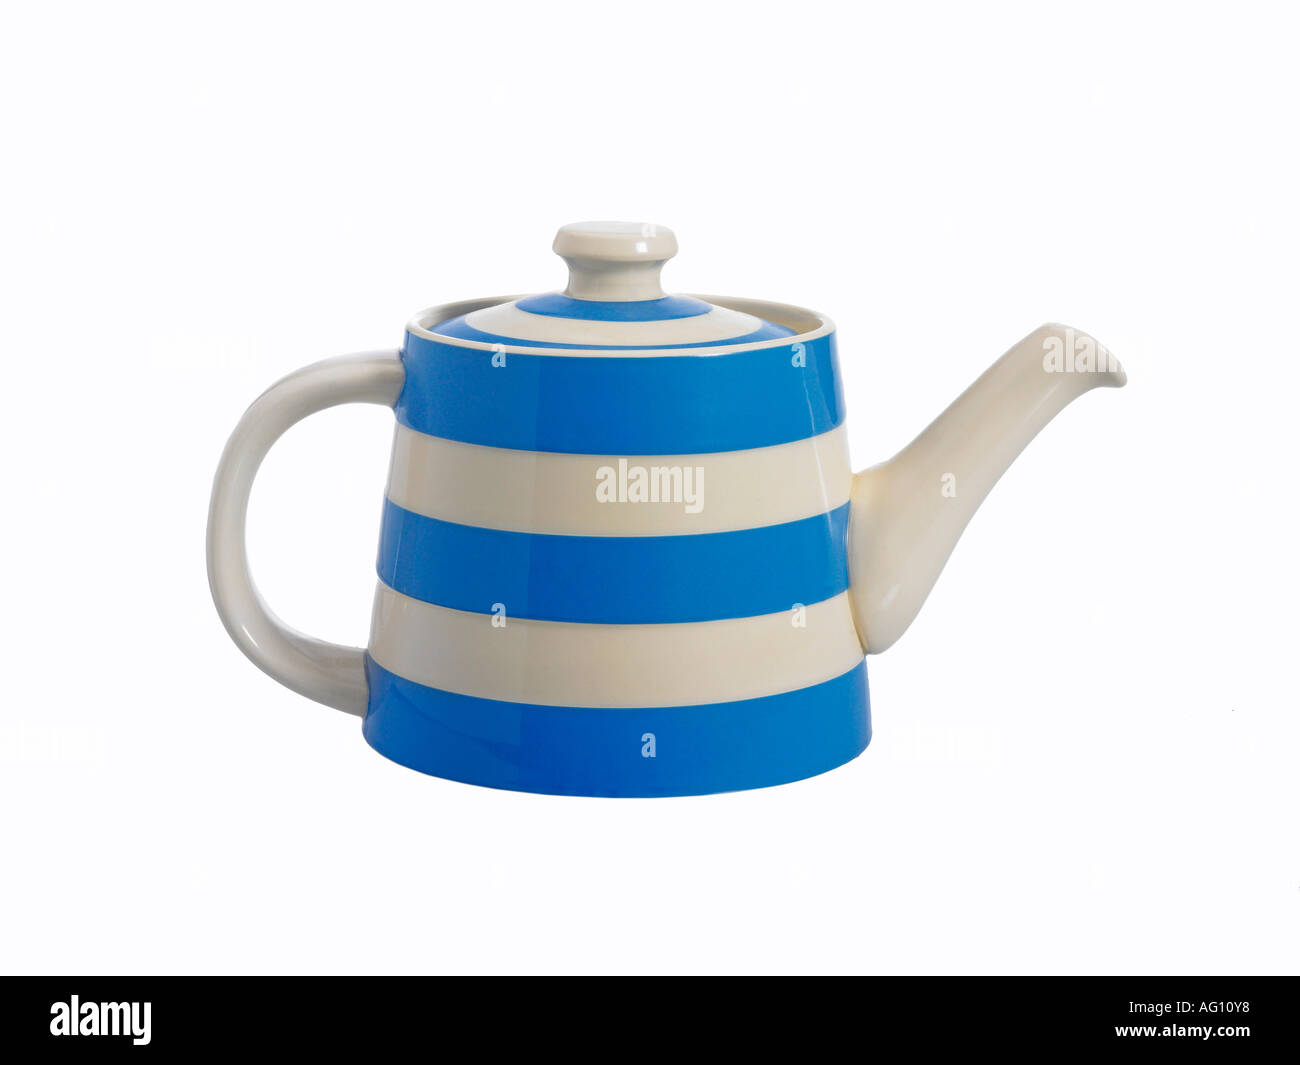 country classic blue and white kitchen ware teapot Stock Photo